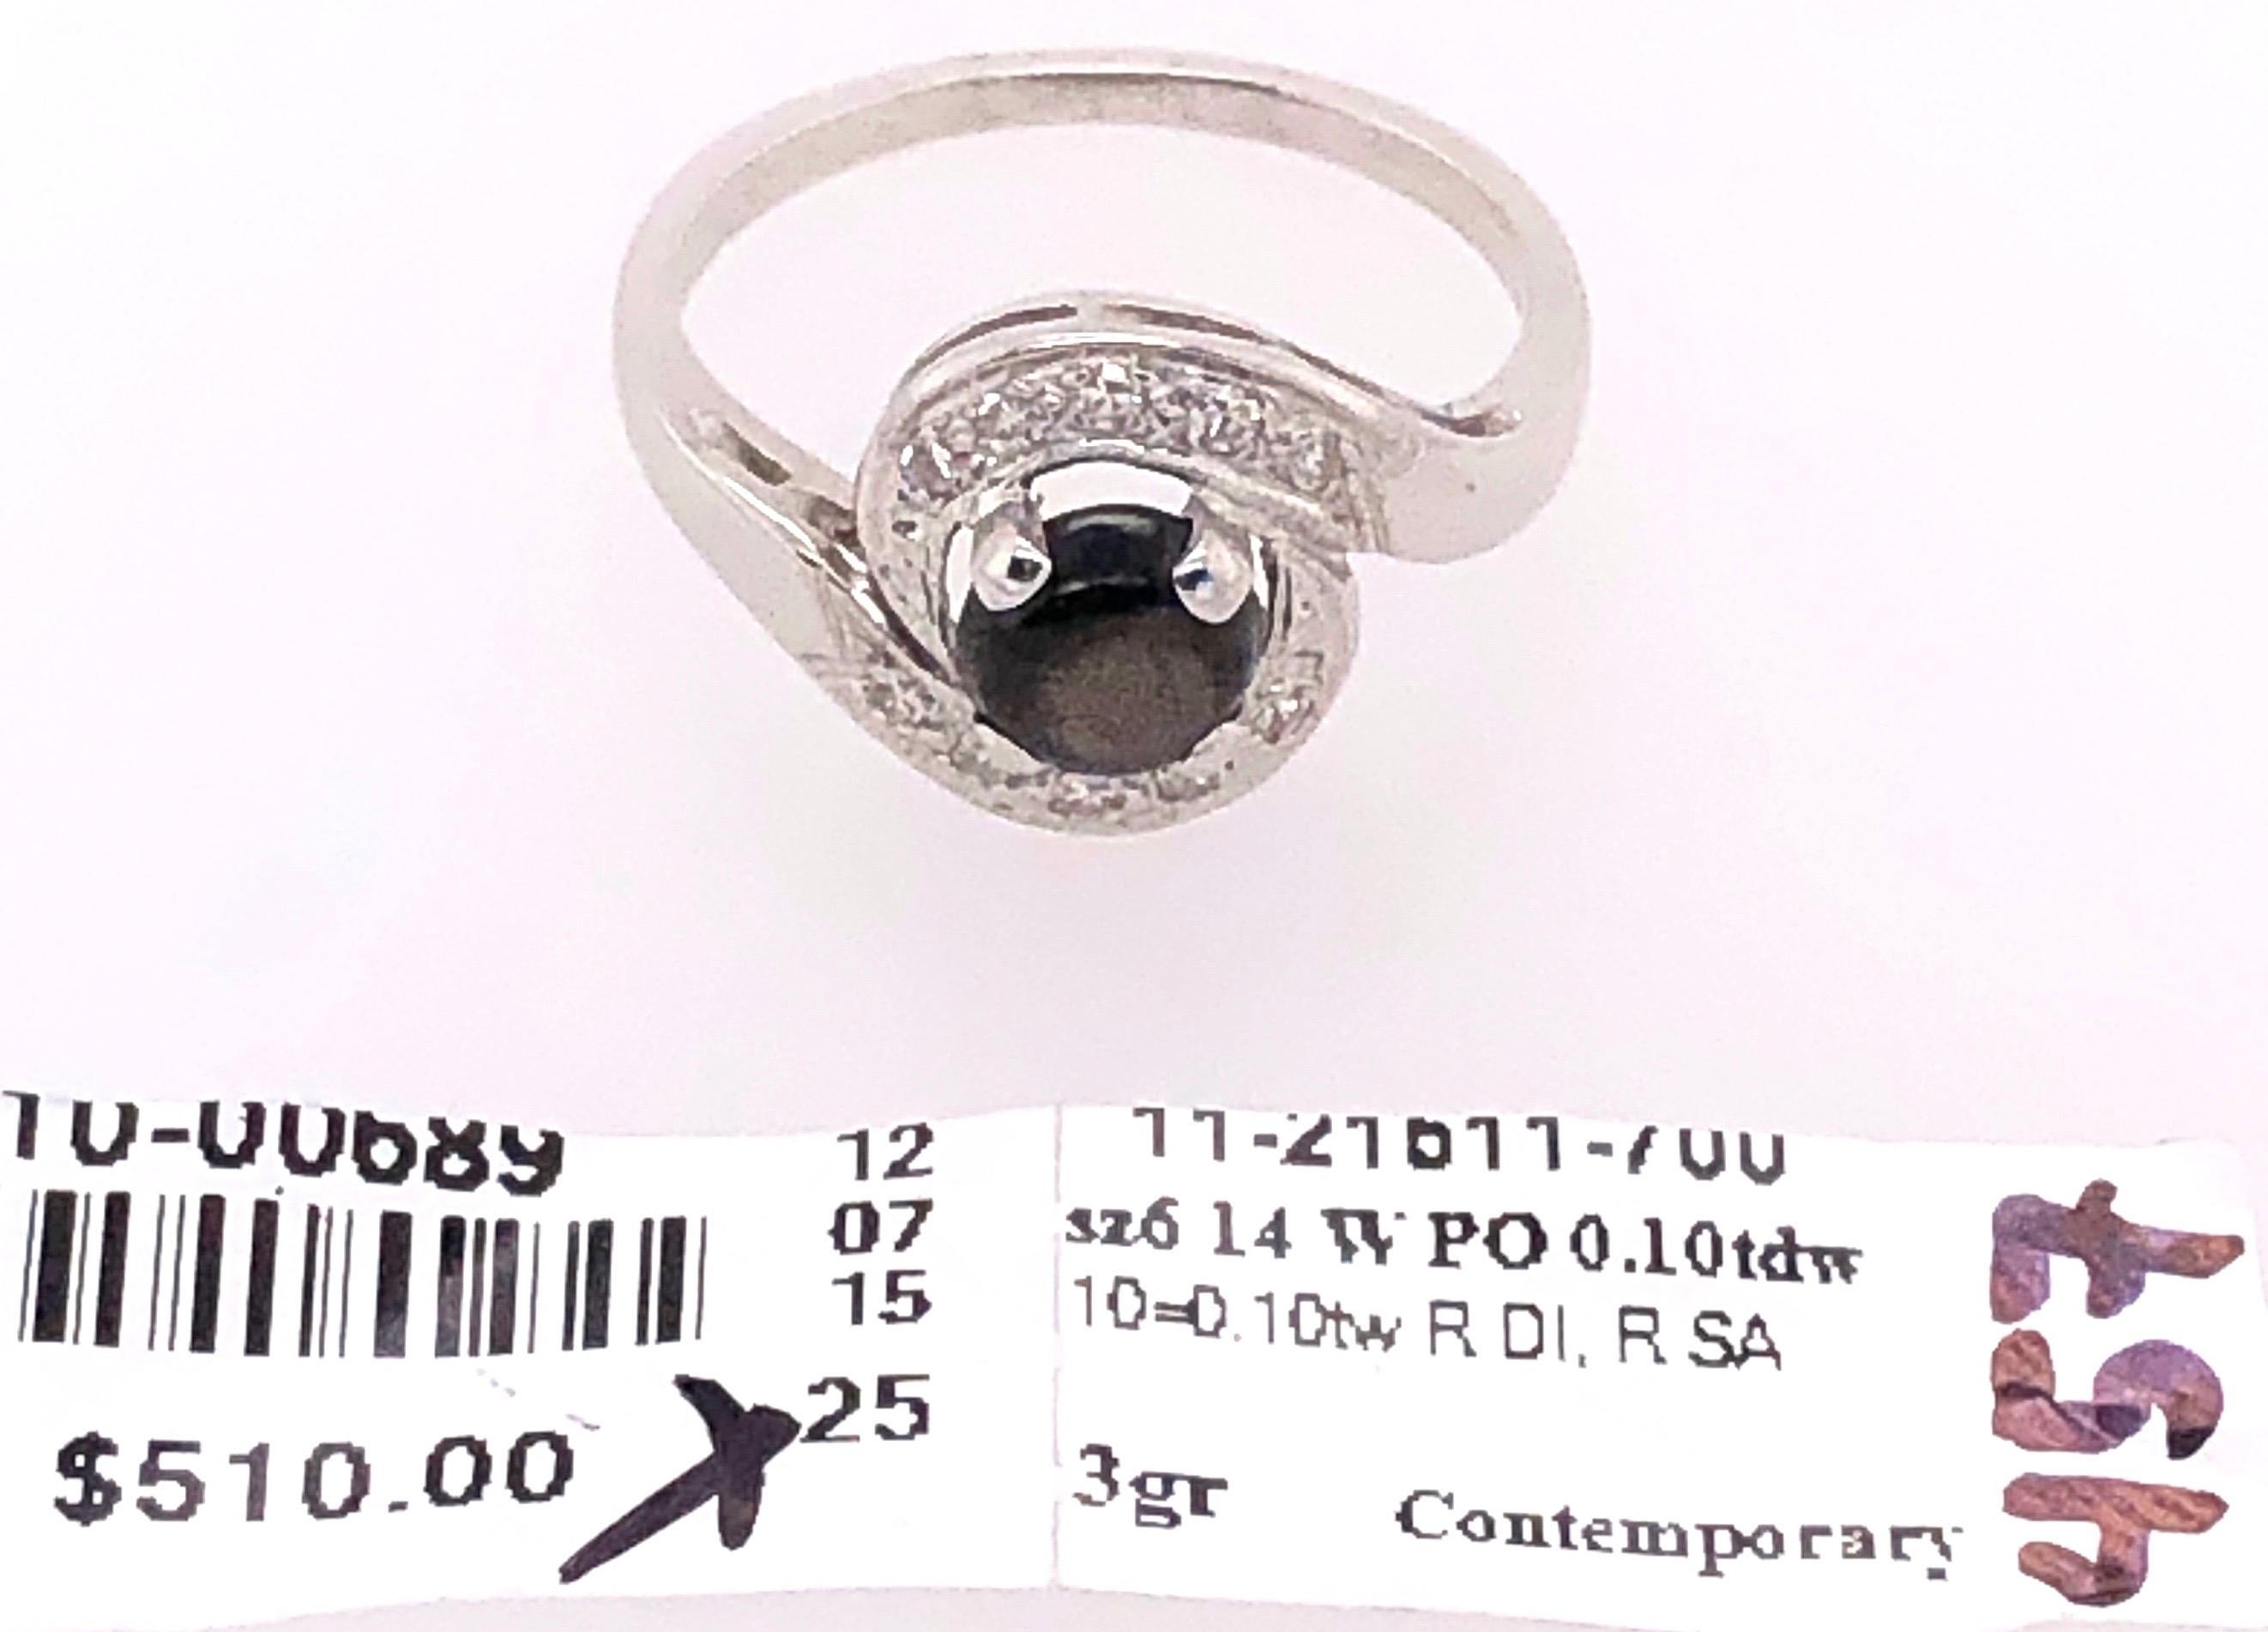 14 Karat white Gold Black Sapphire Contemporary Ring with Diamond Accents For Sale 4